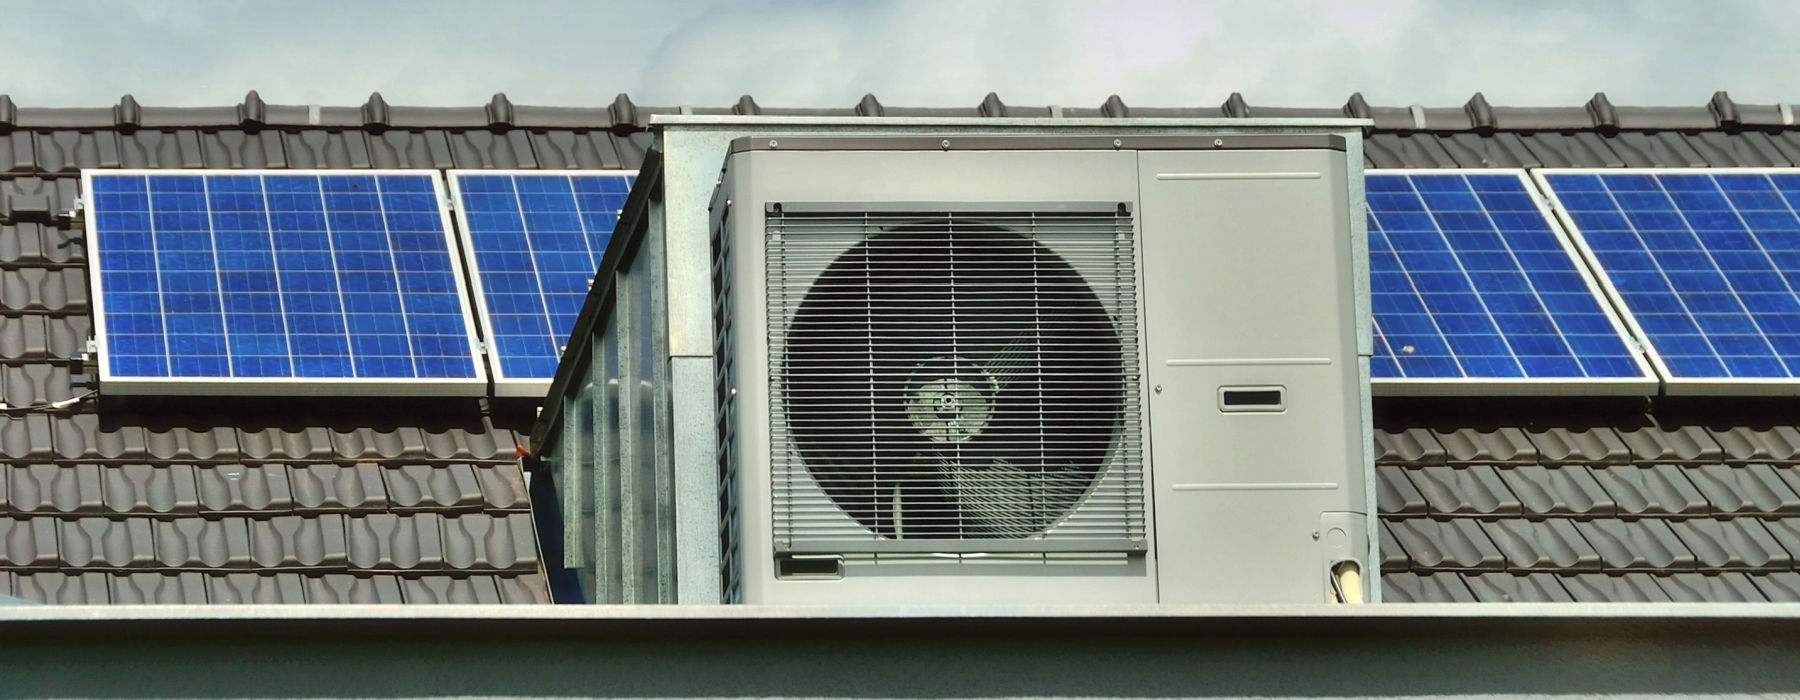 Commercial Solar PV + Heat Pumps: Benefits for NYC Building Owners